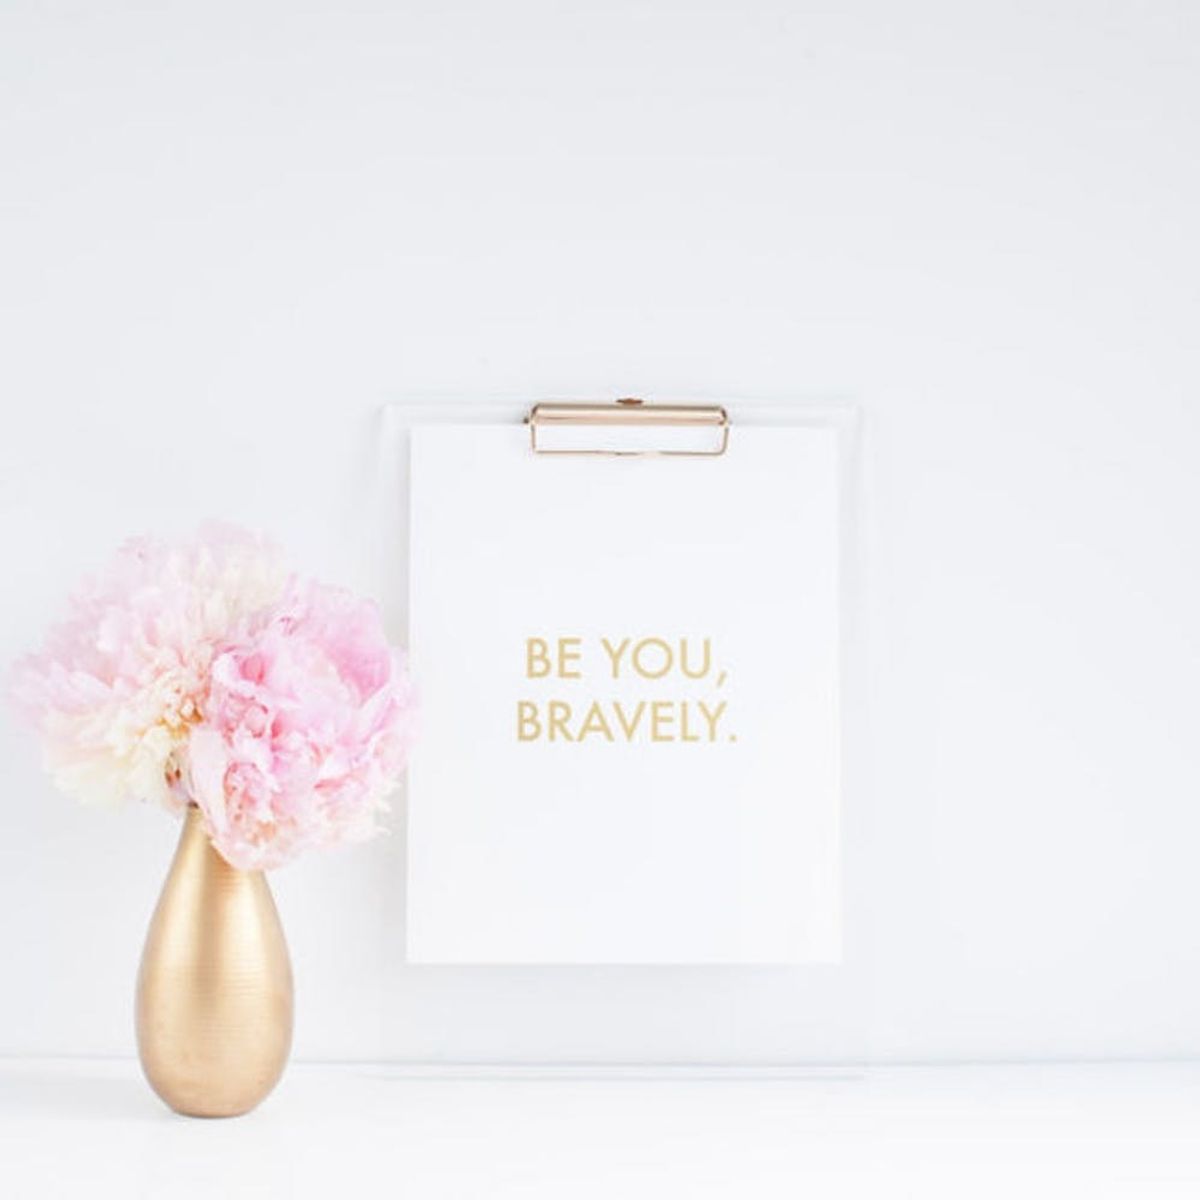 12 Pretty Etsy Prints for All Your Wall Art Needs